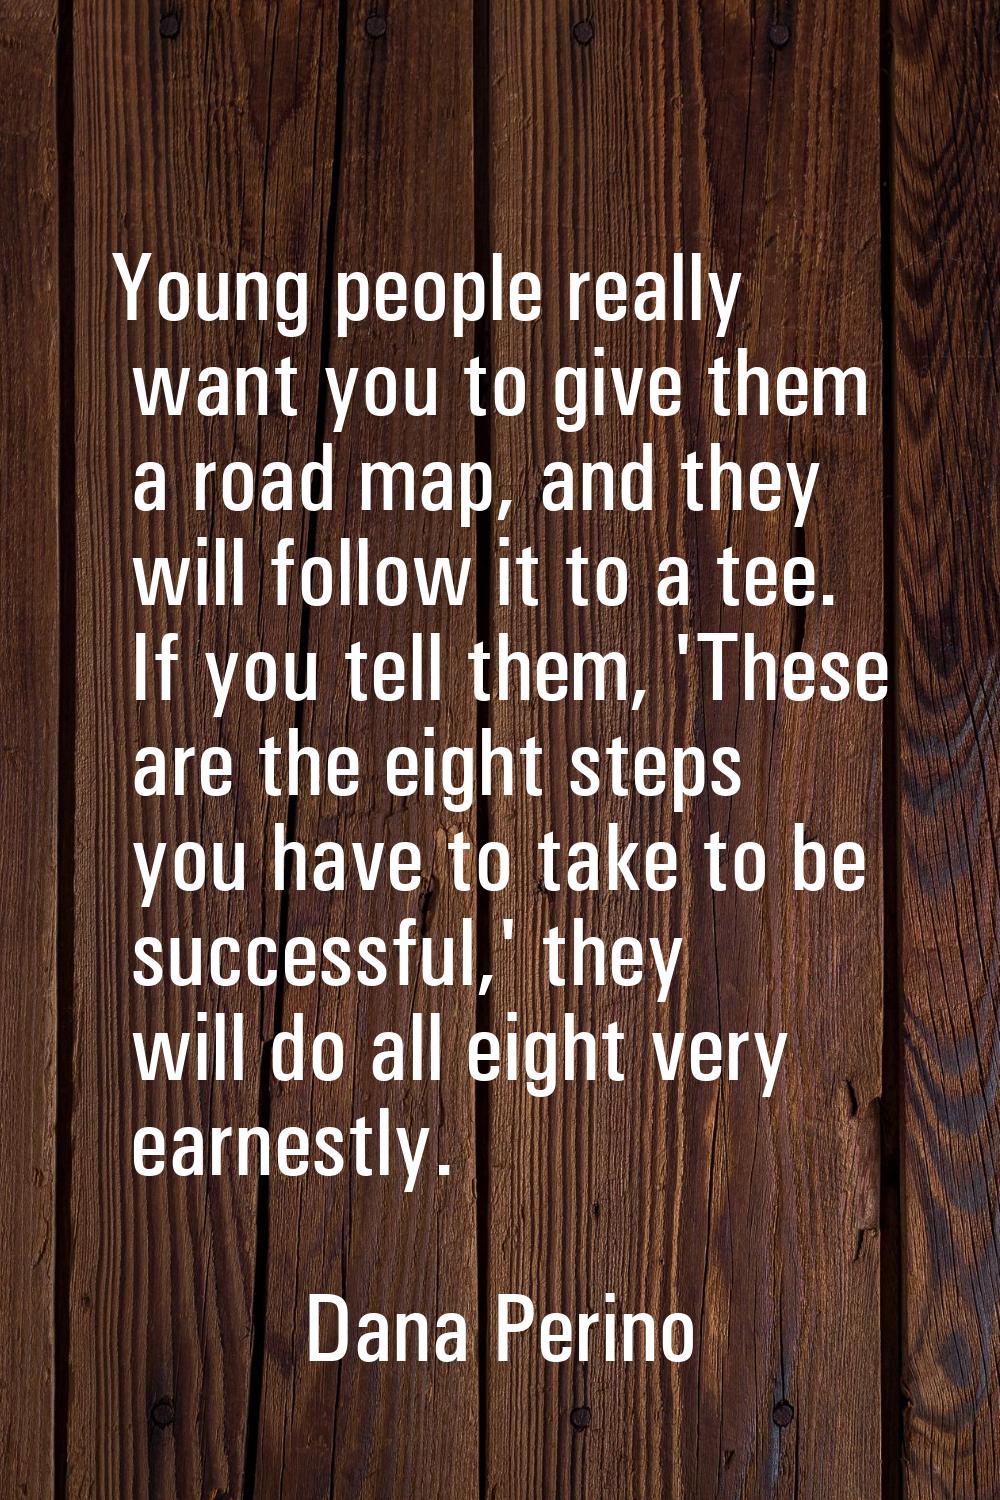 Young people really want you to give them a road map, and they will follow it to a tee. If you tell